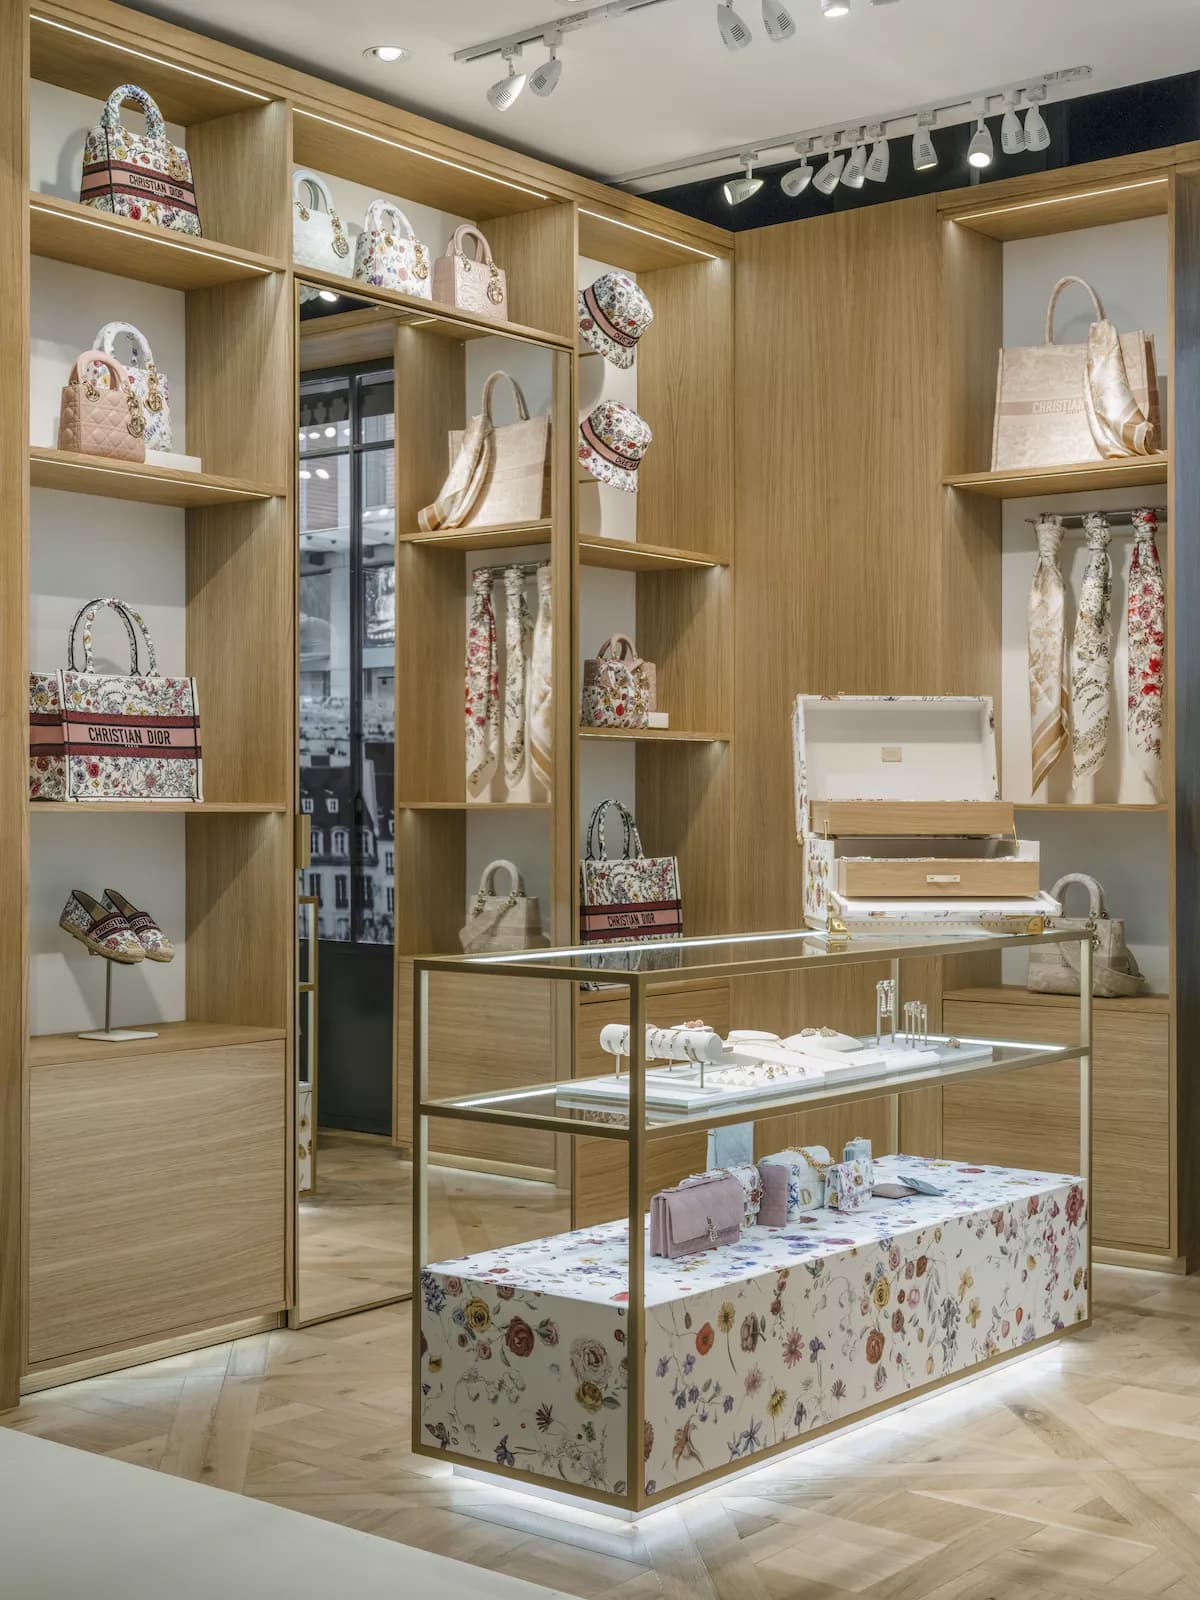 Dior's pop-up store at Harrods is a must-see this summer - see photos